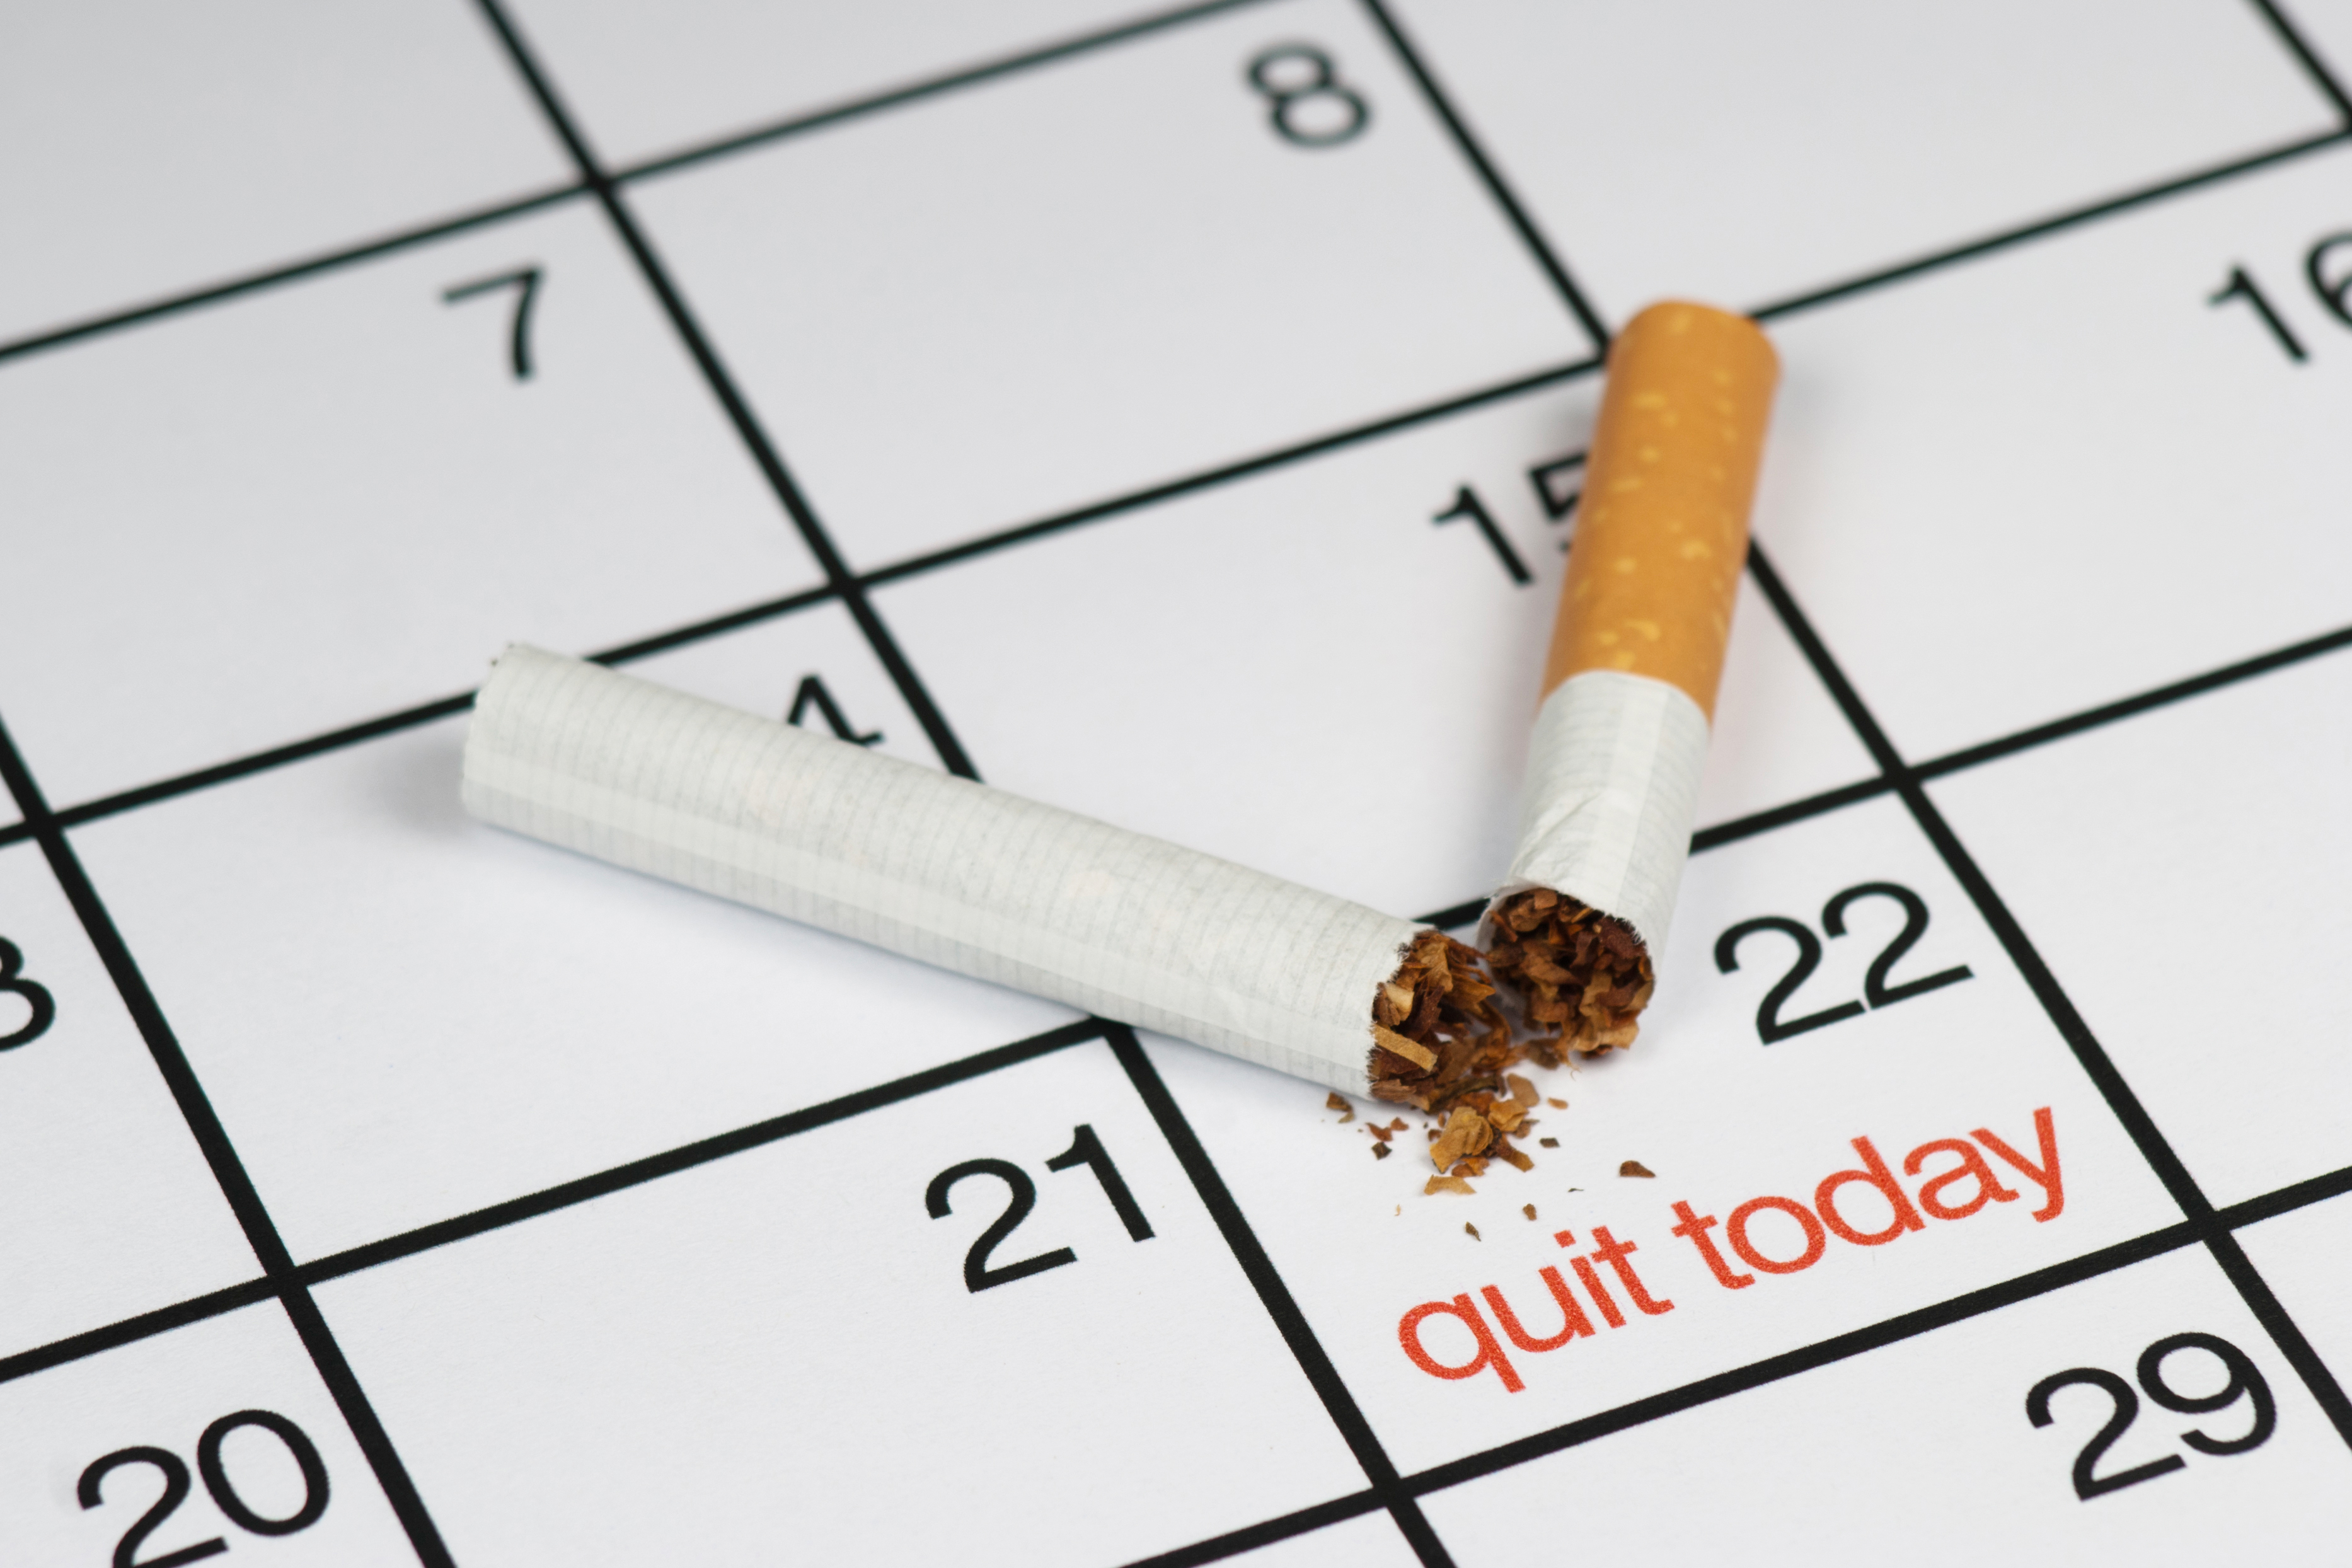 American Lung Association Reveals Five Tips to Help Quit Smoking